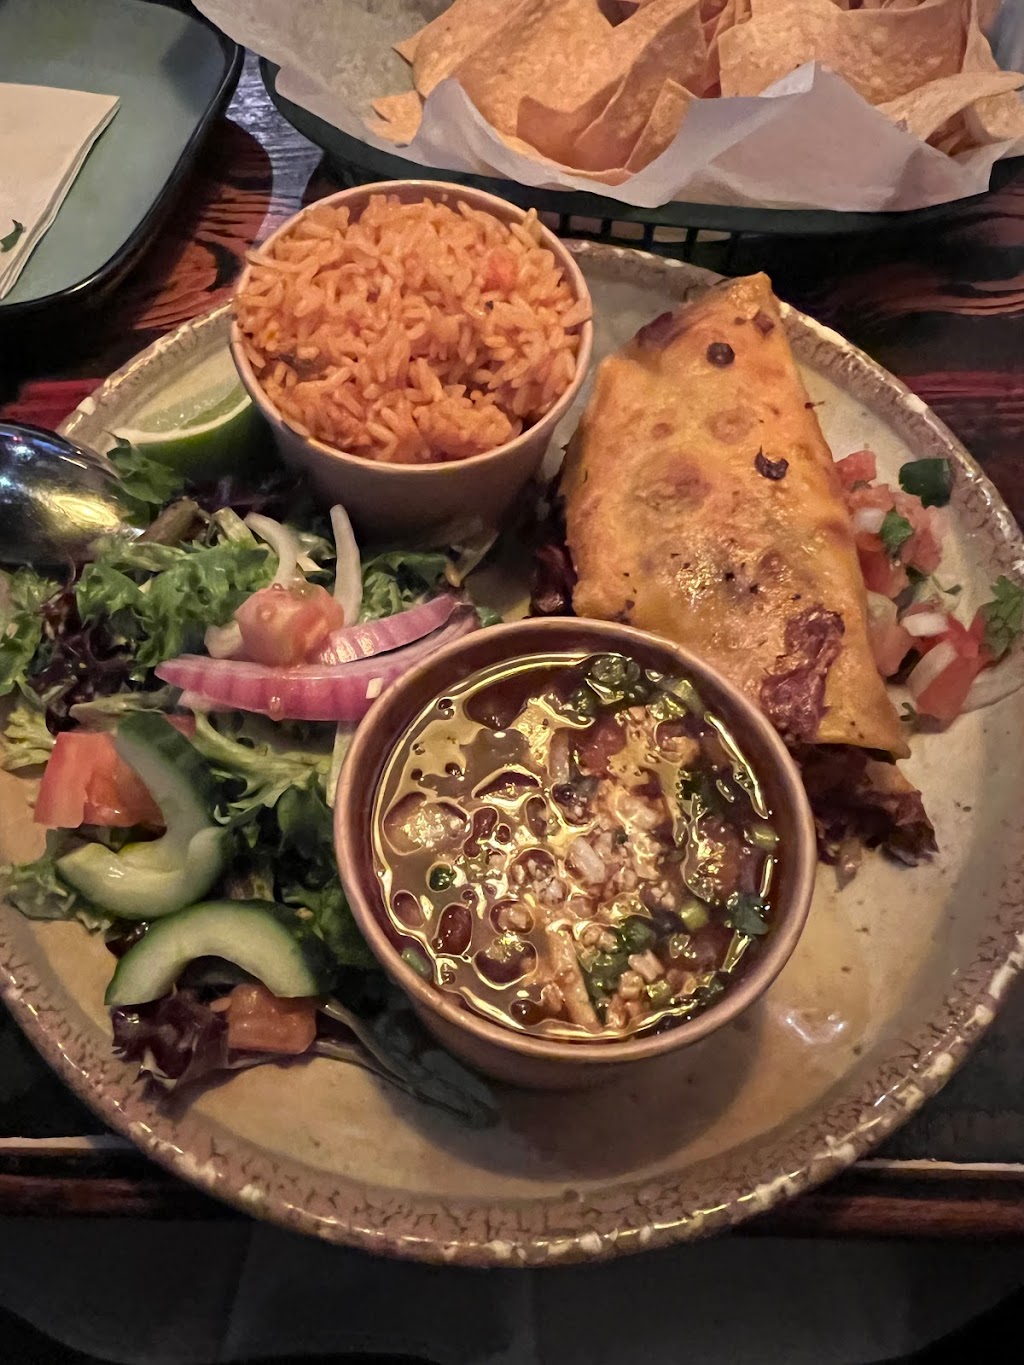 Mission Cantina | 485 West St, Amherst, MA 01002 | Phone: (413) 230-3580